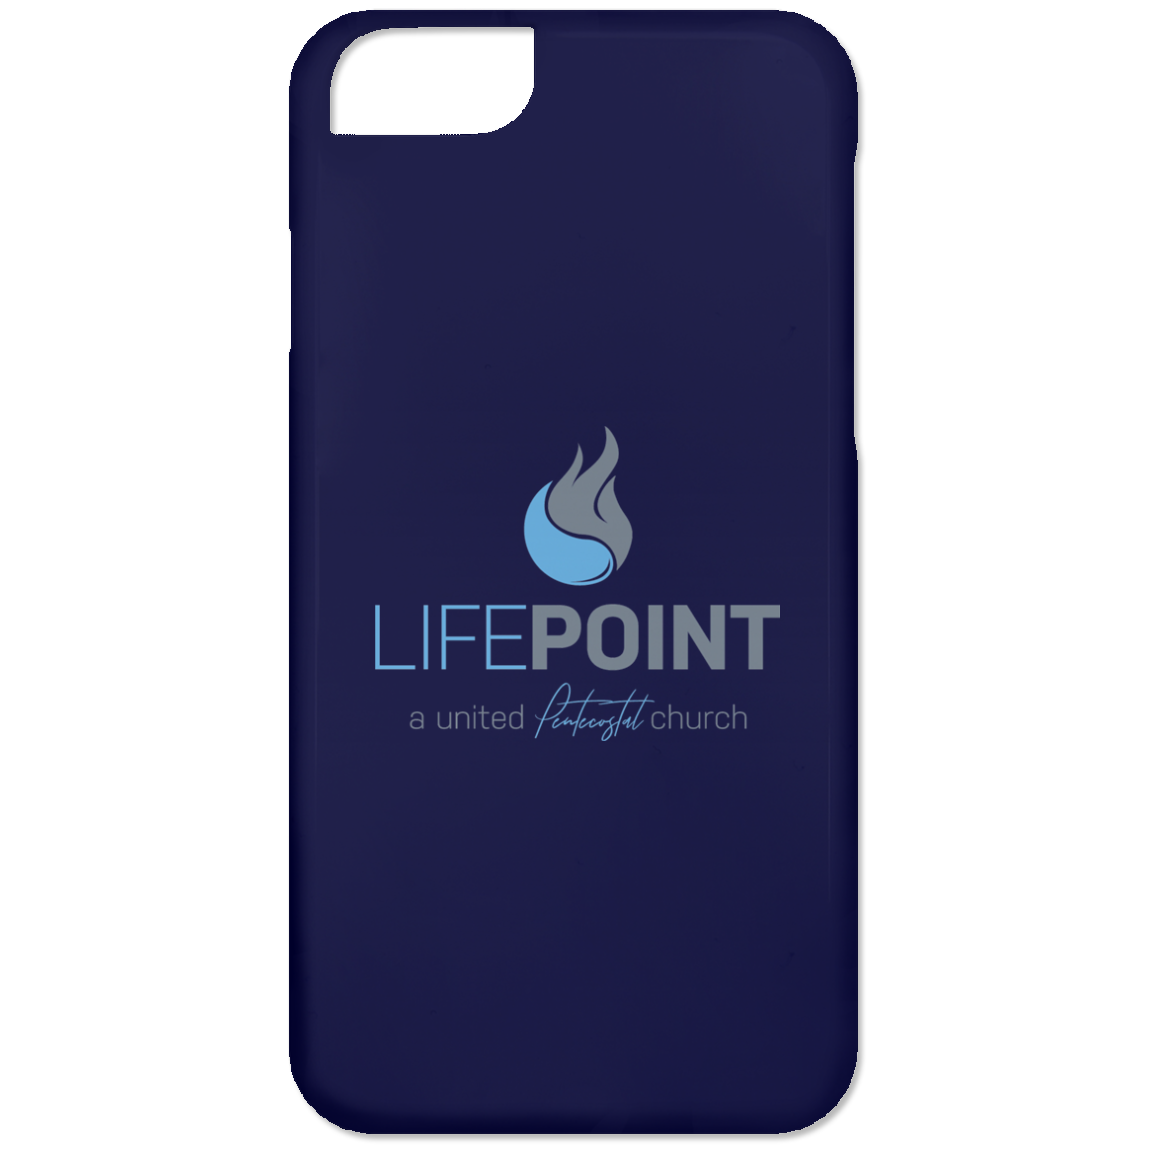 Life Point iPhone 6 Case